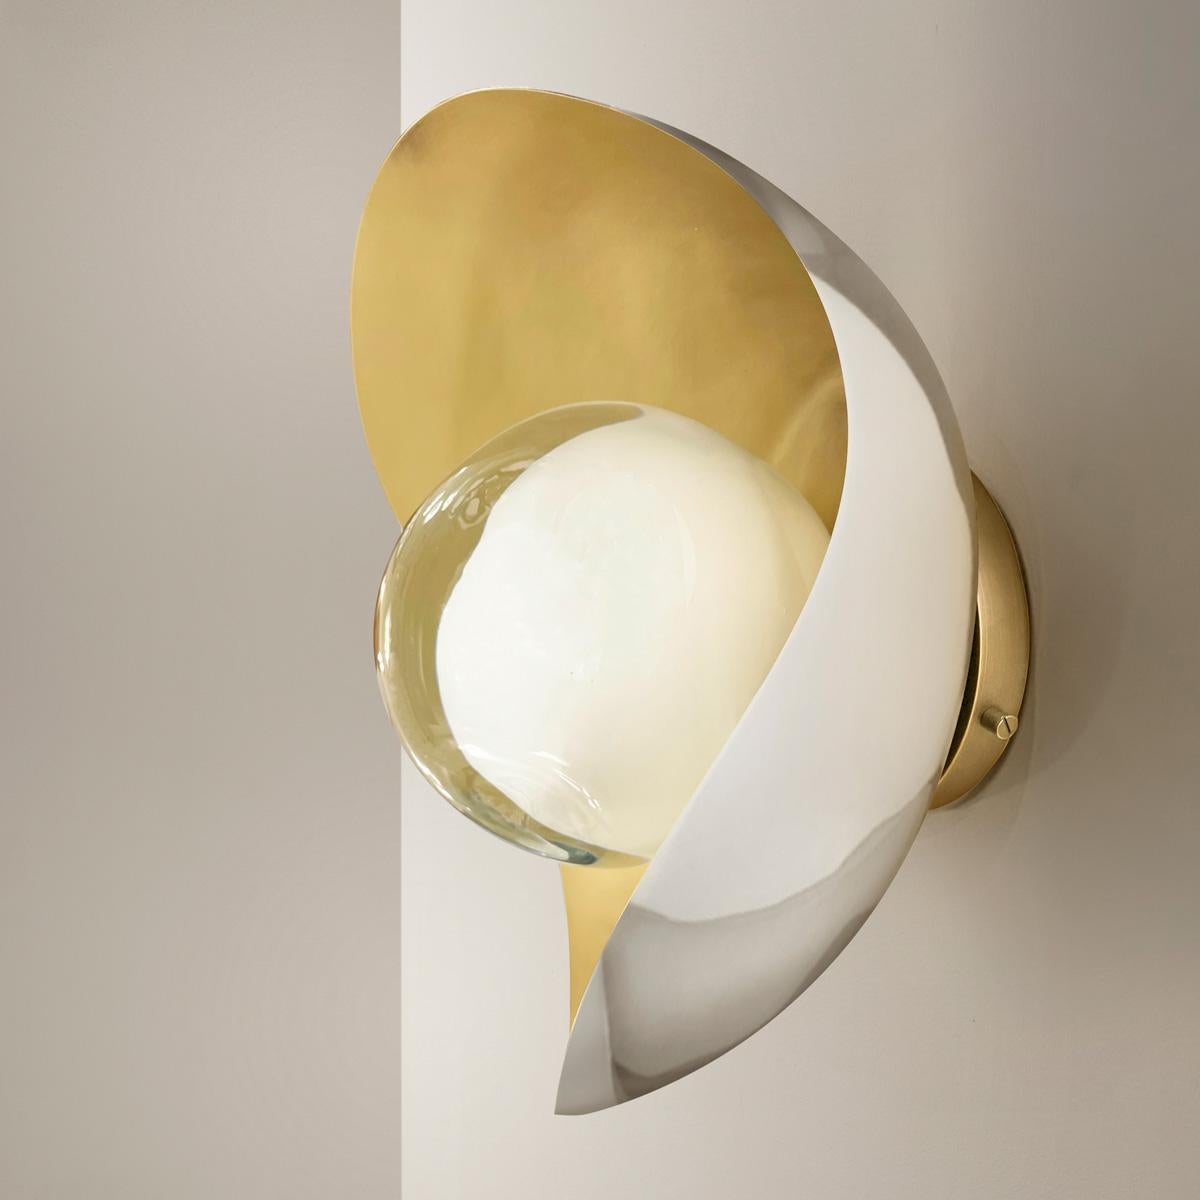 Contemporary Perla Wall Light by Gaspare Asaro-Satin Brass/Polished Nickel Finish For Sale